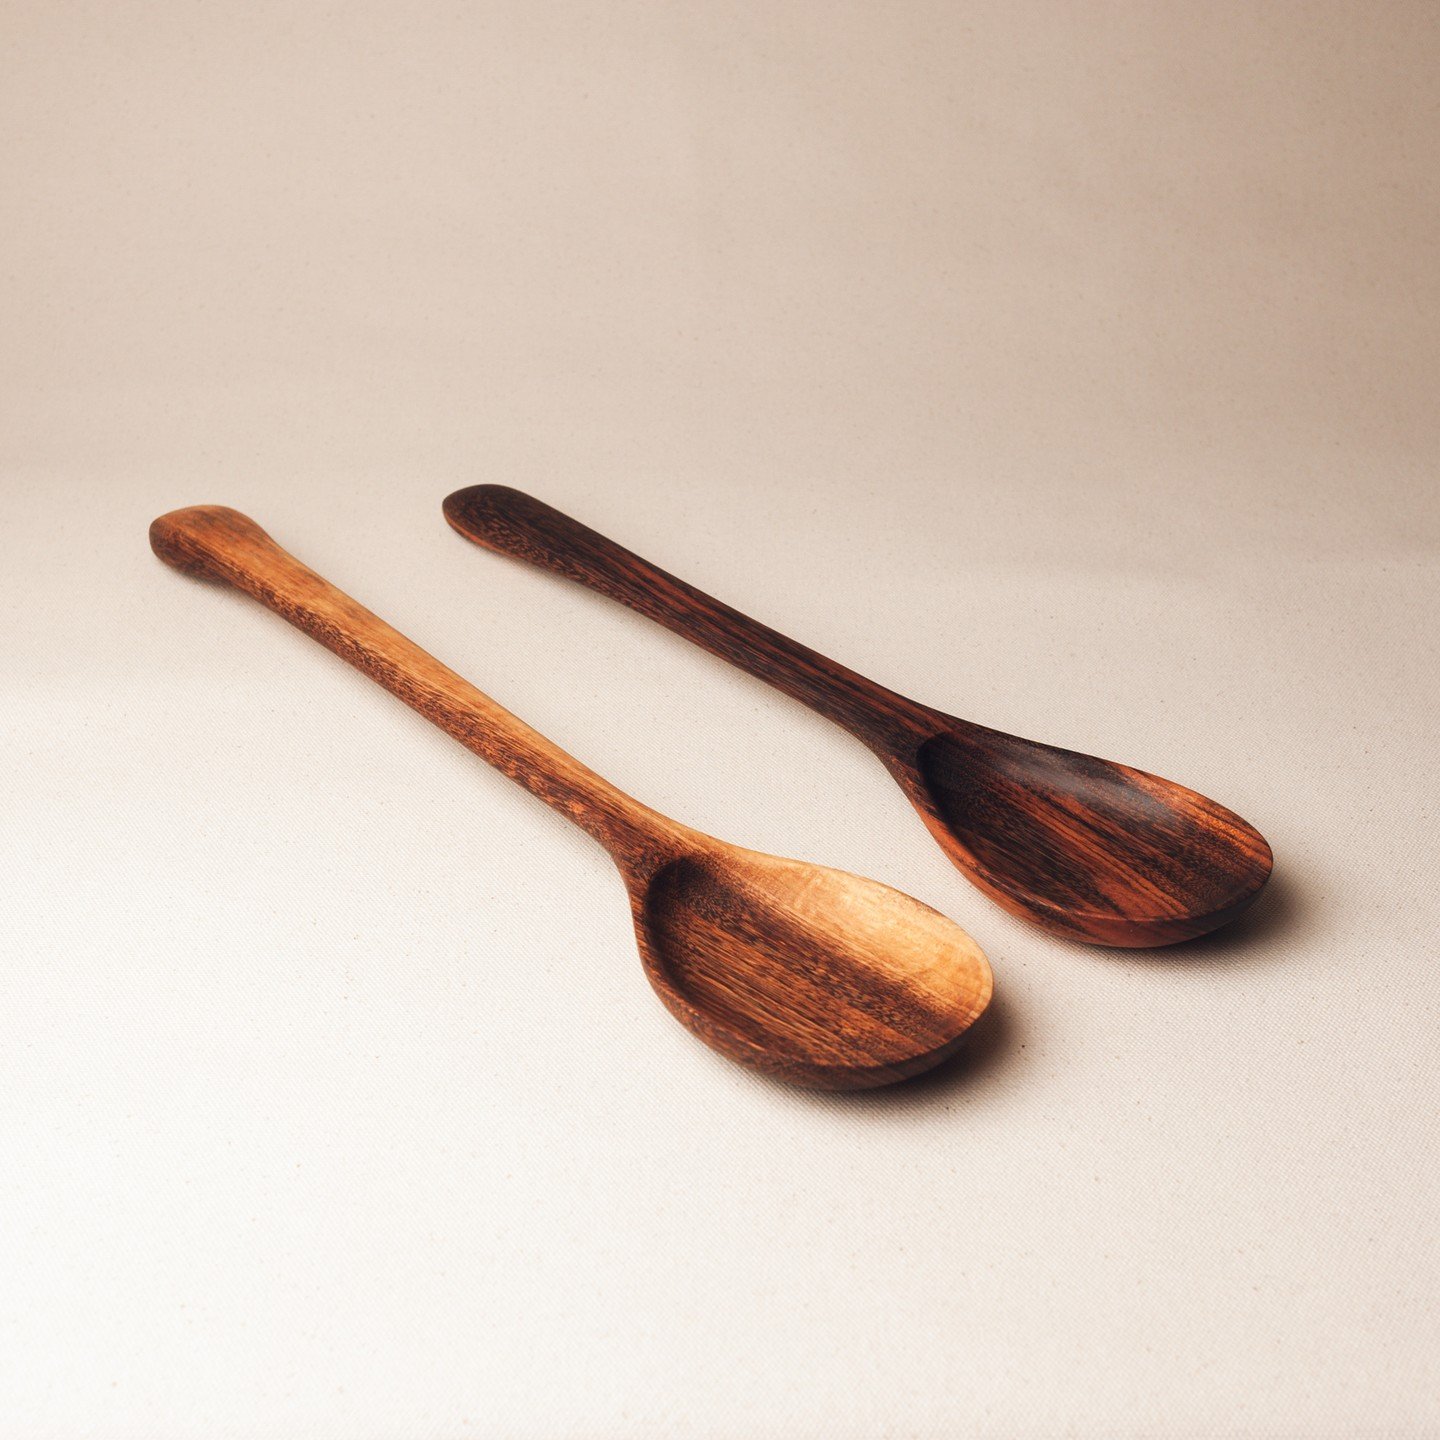 David Rully's cooking utensils are special because they are made by hand showing off the woods natural grain and patterns. We've even displayed some jewelry on them for some recent photos we shared here!

Wood utensils are durable yet kinder to your 